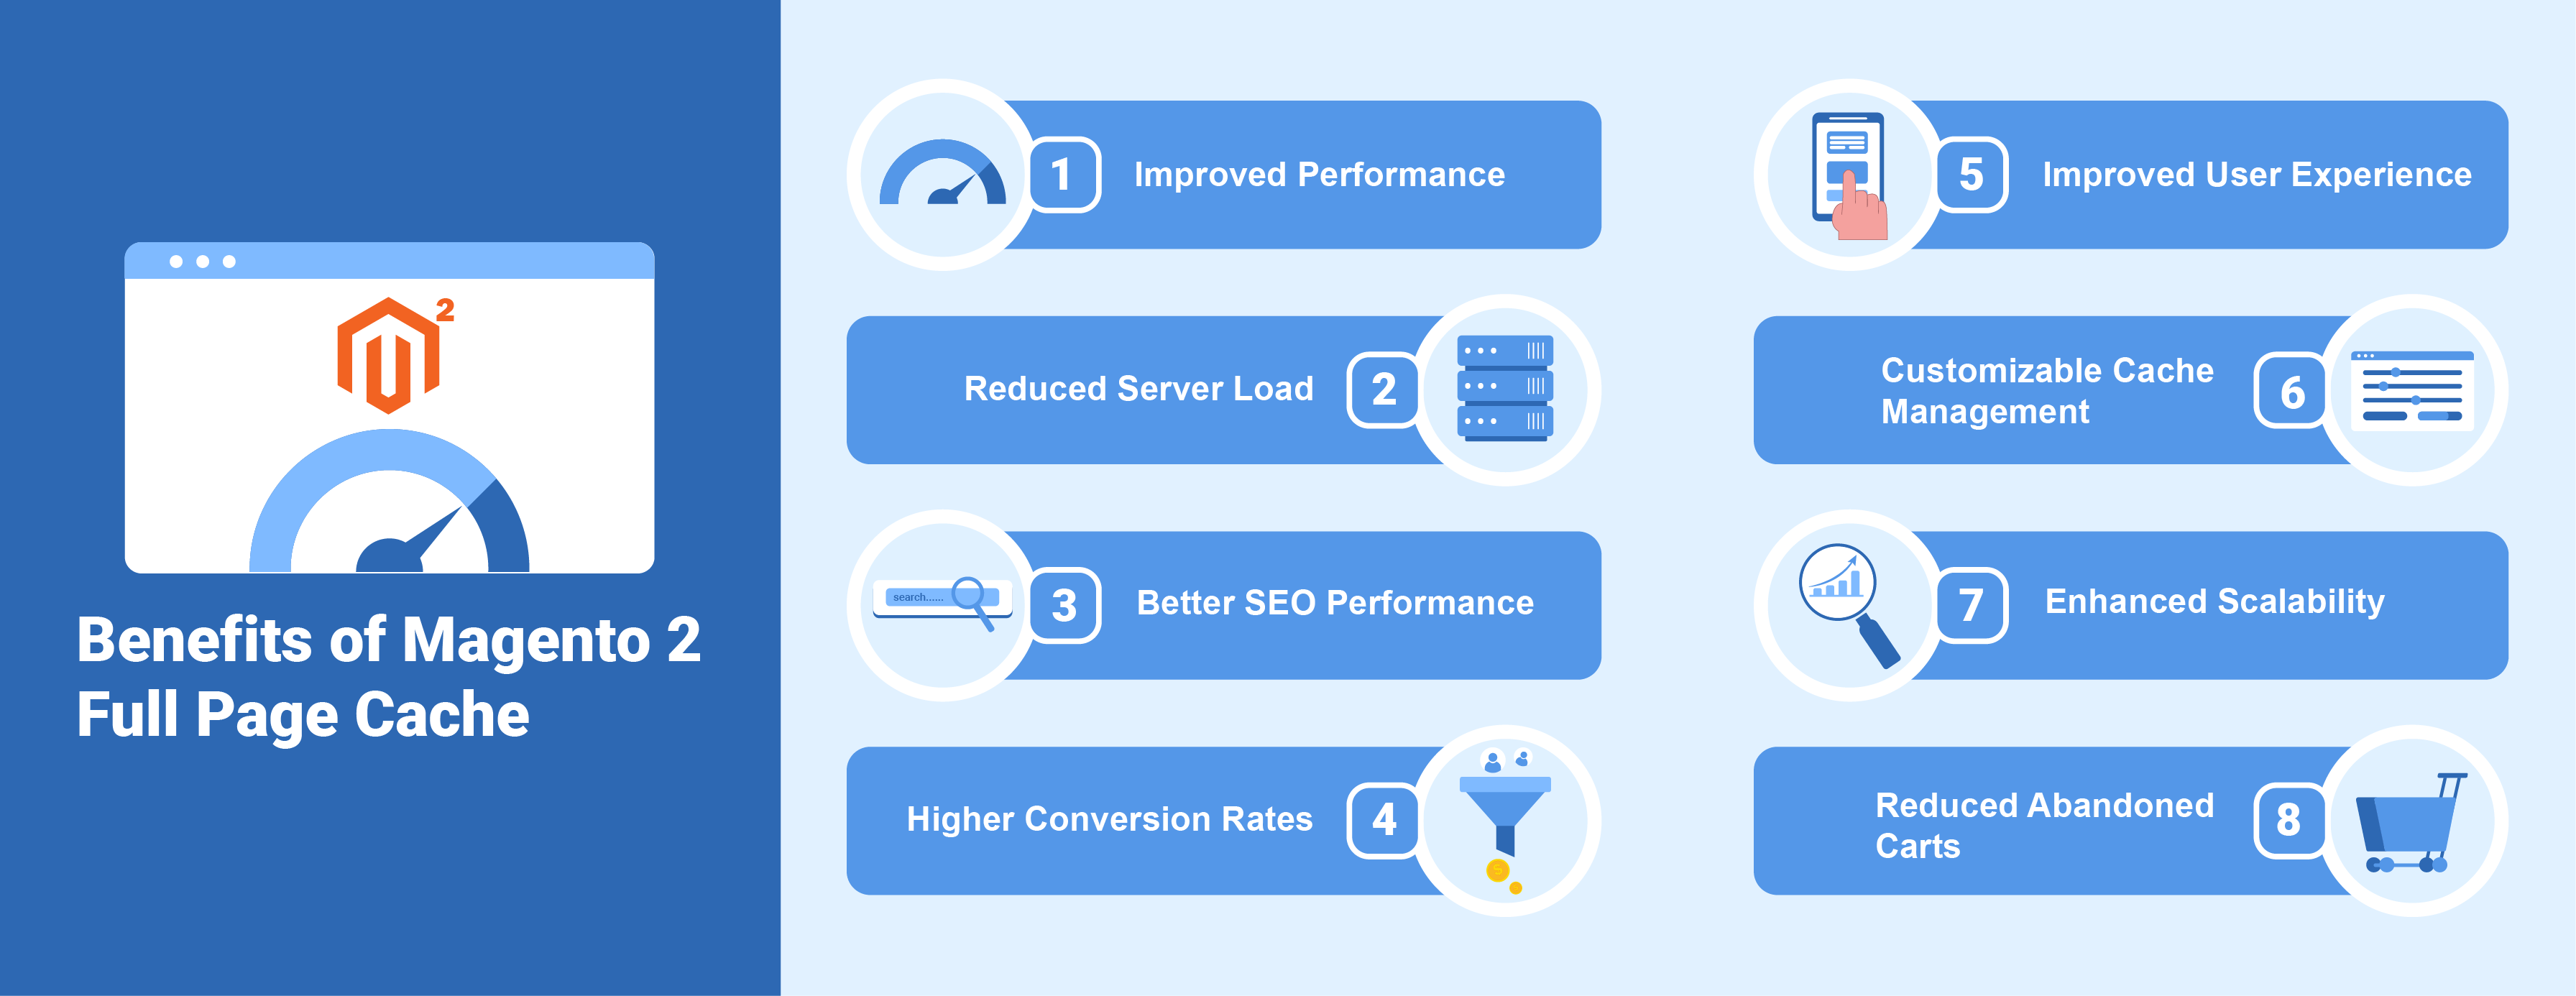 Benefits of Magento 2 Full Page Cache